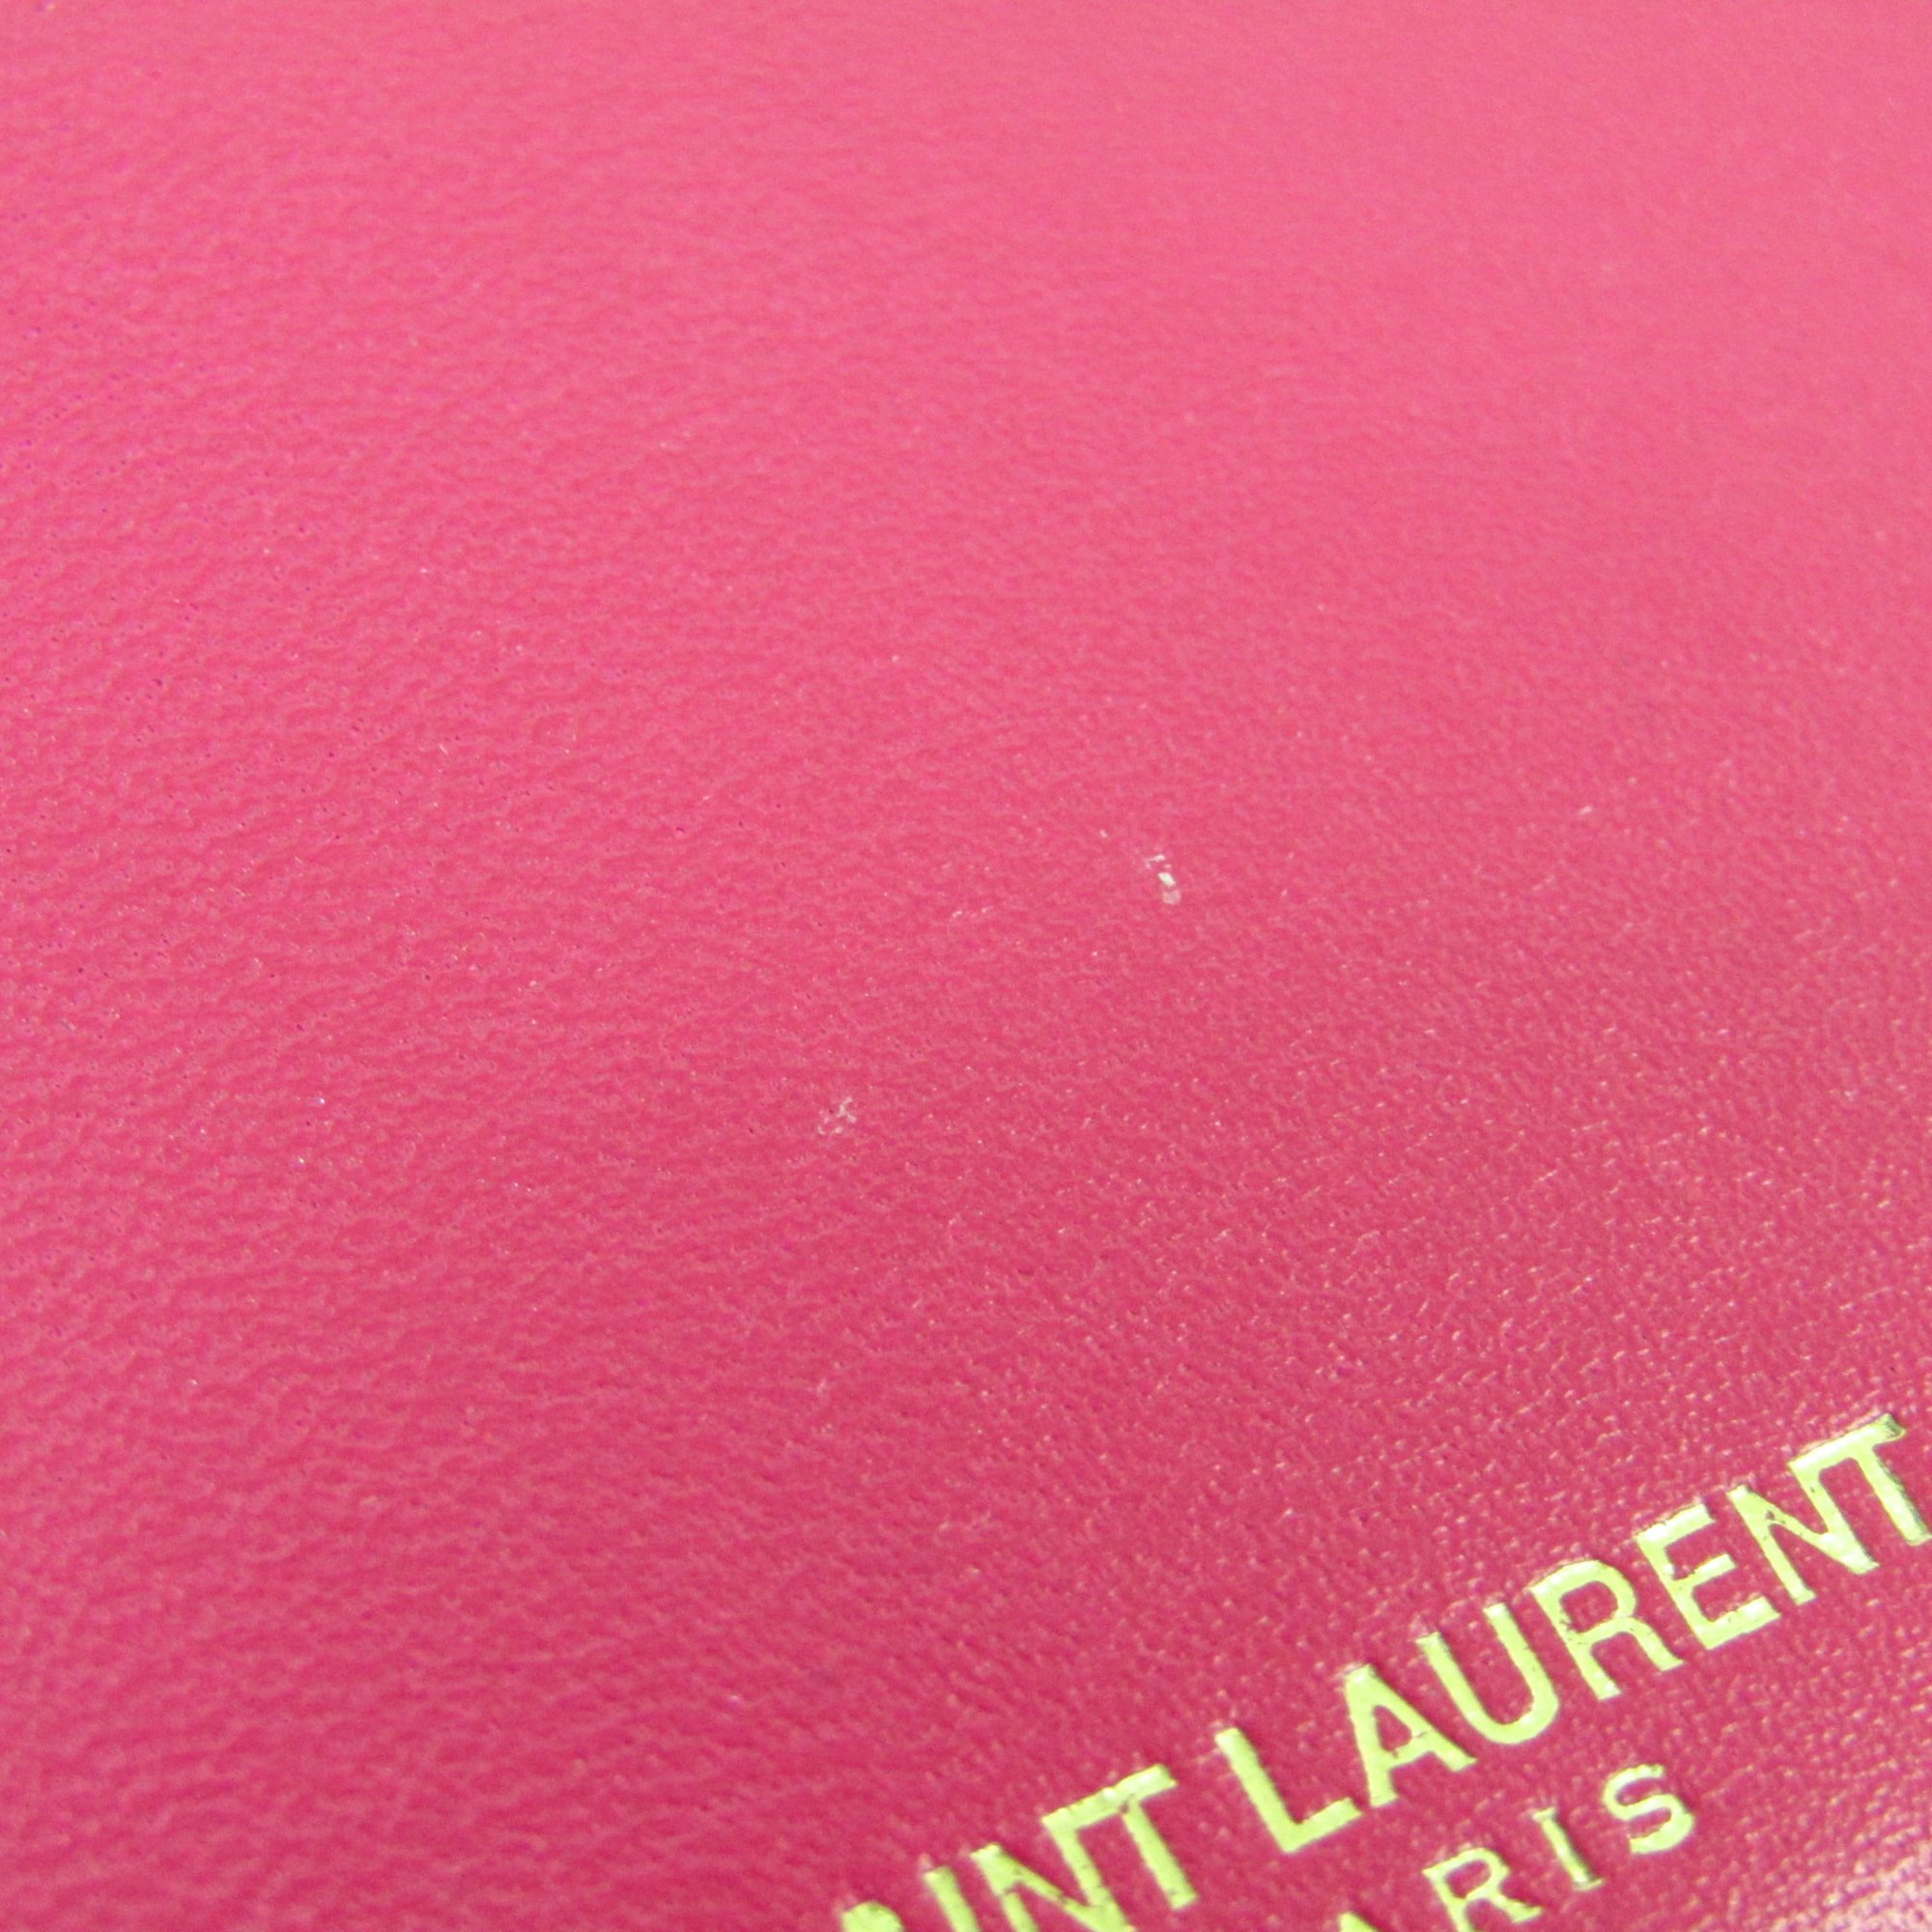 Yves Saint Laurent 379278 Women's Leather Coin Purse/coin Case Pink